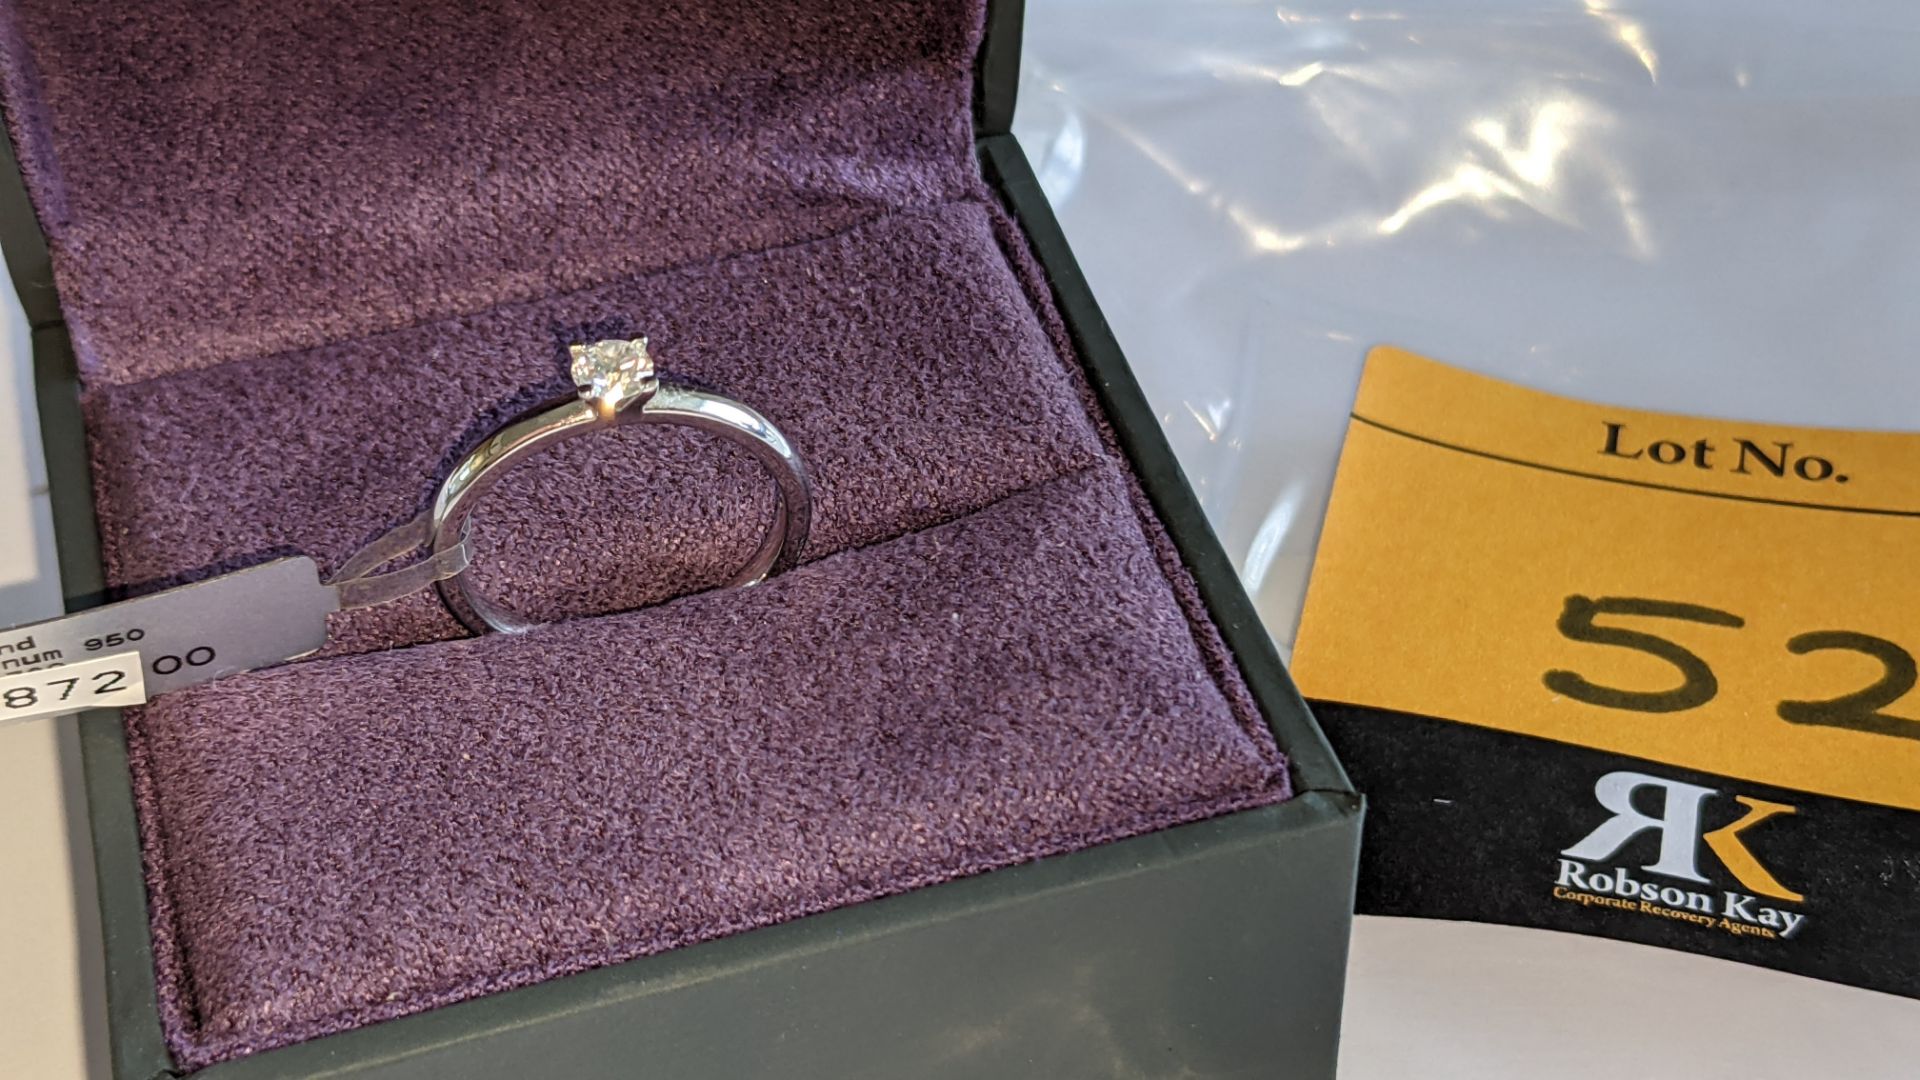 Platinum 950 diamond ring with 0.26ct H/VS central stone. RRP £1,872 - Image 12 of 15